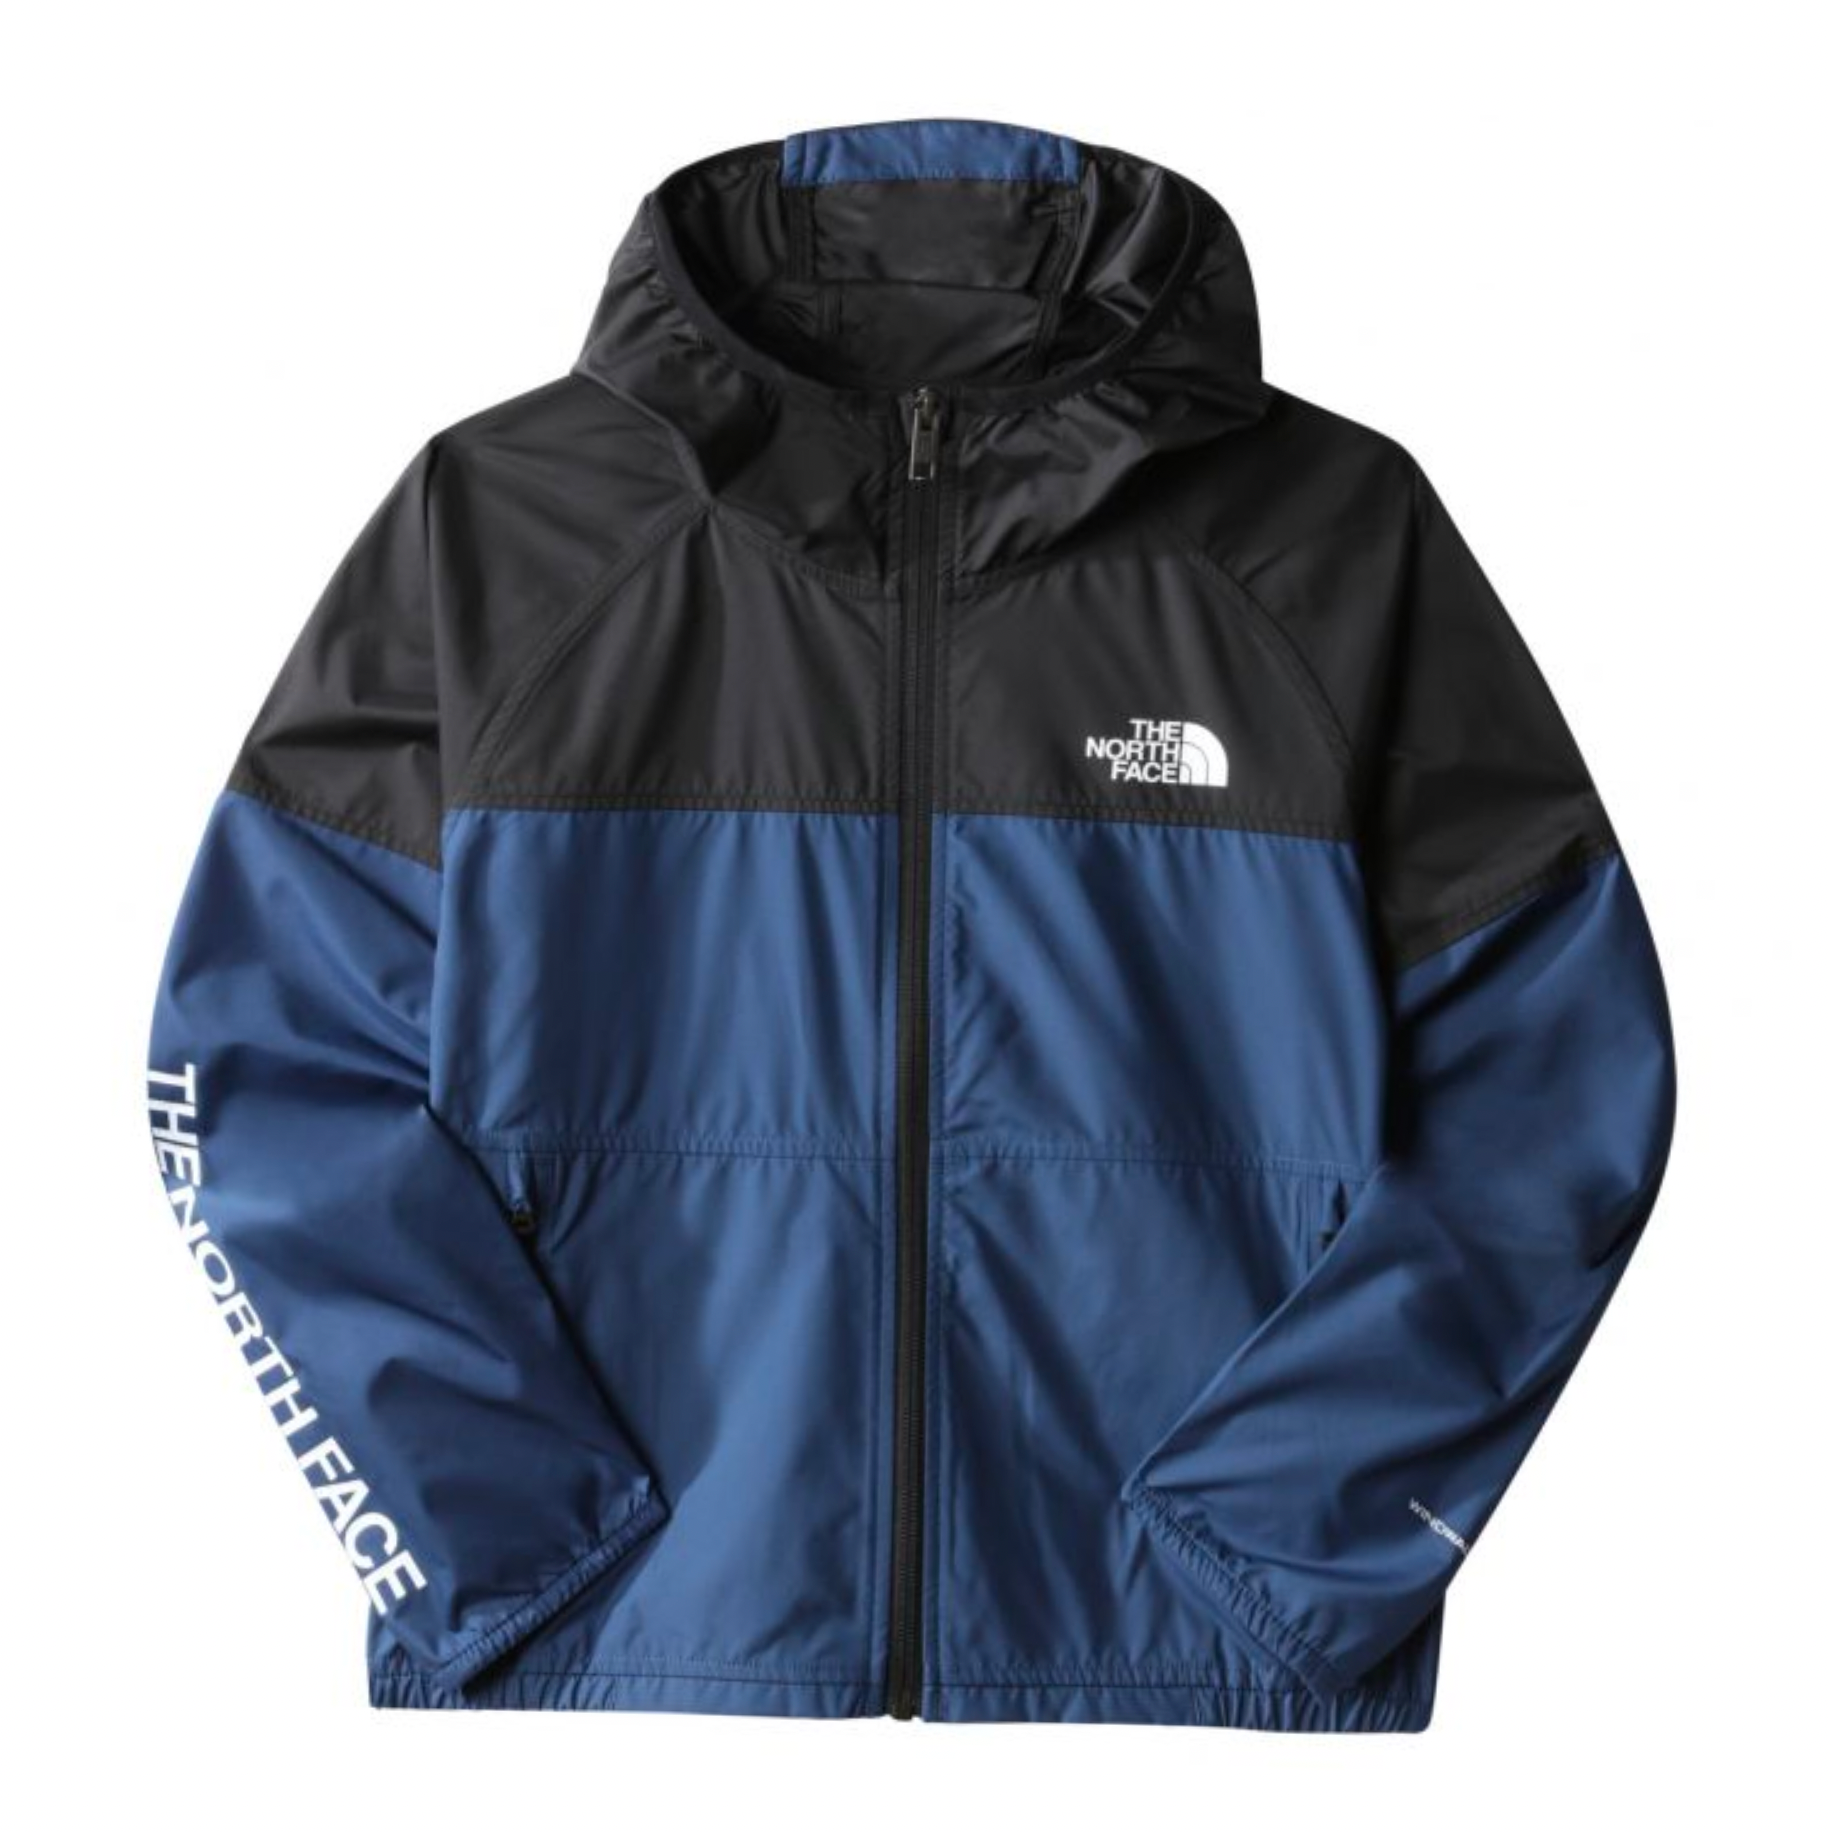 THE NORTH FACE - Dry jacket - 6 years old